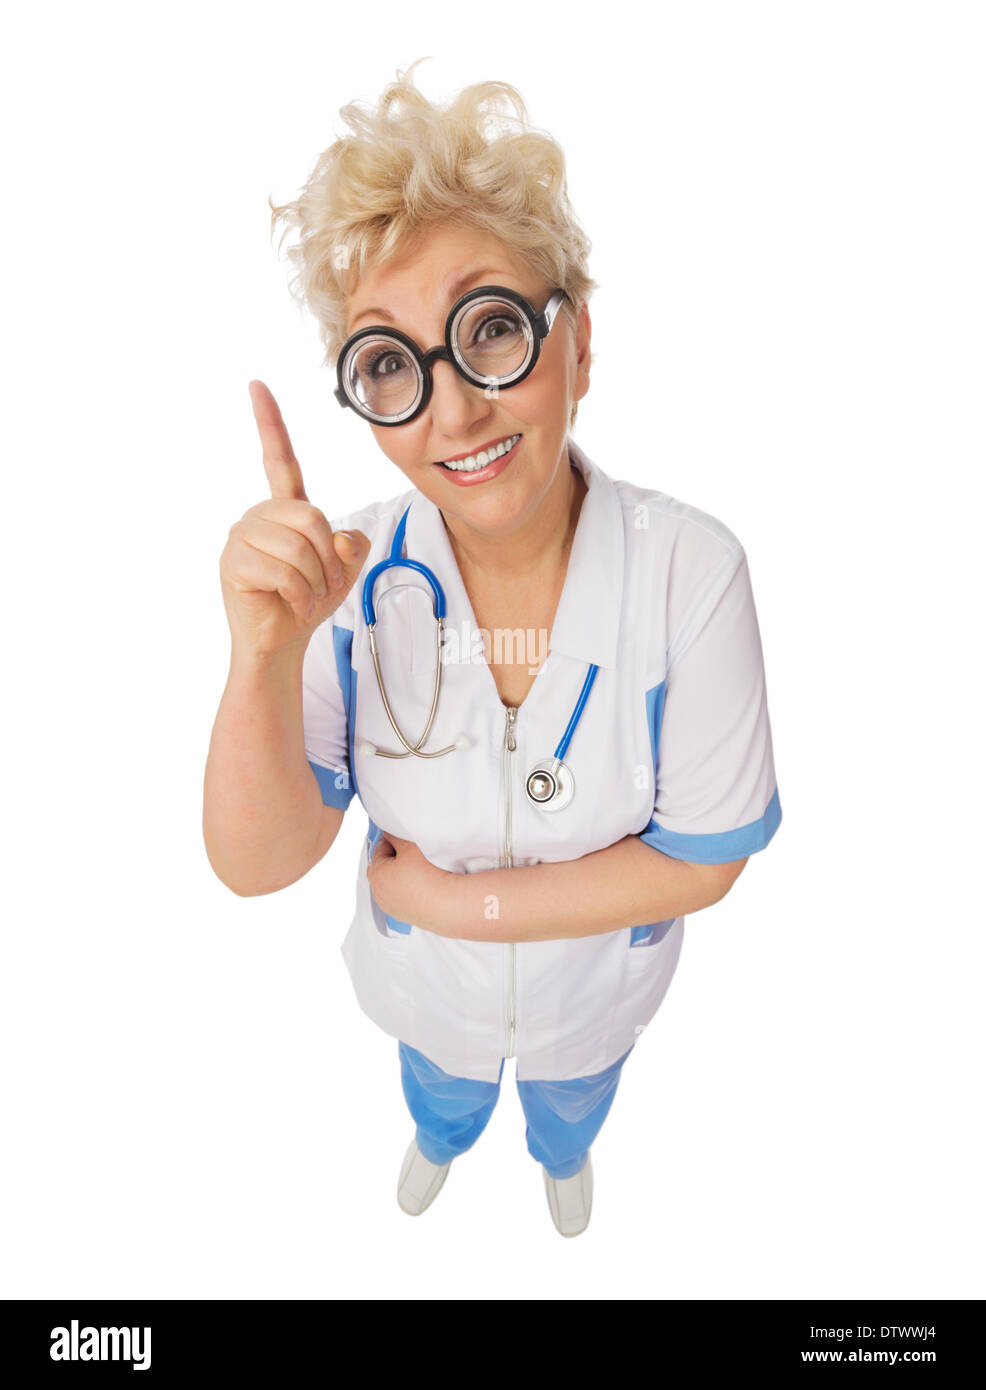 Funny doctor with nerd glasses isolated Stock Photo